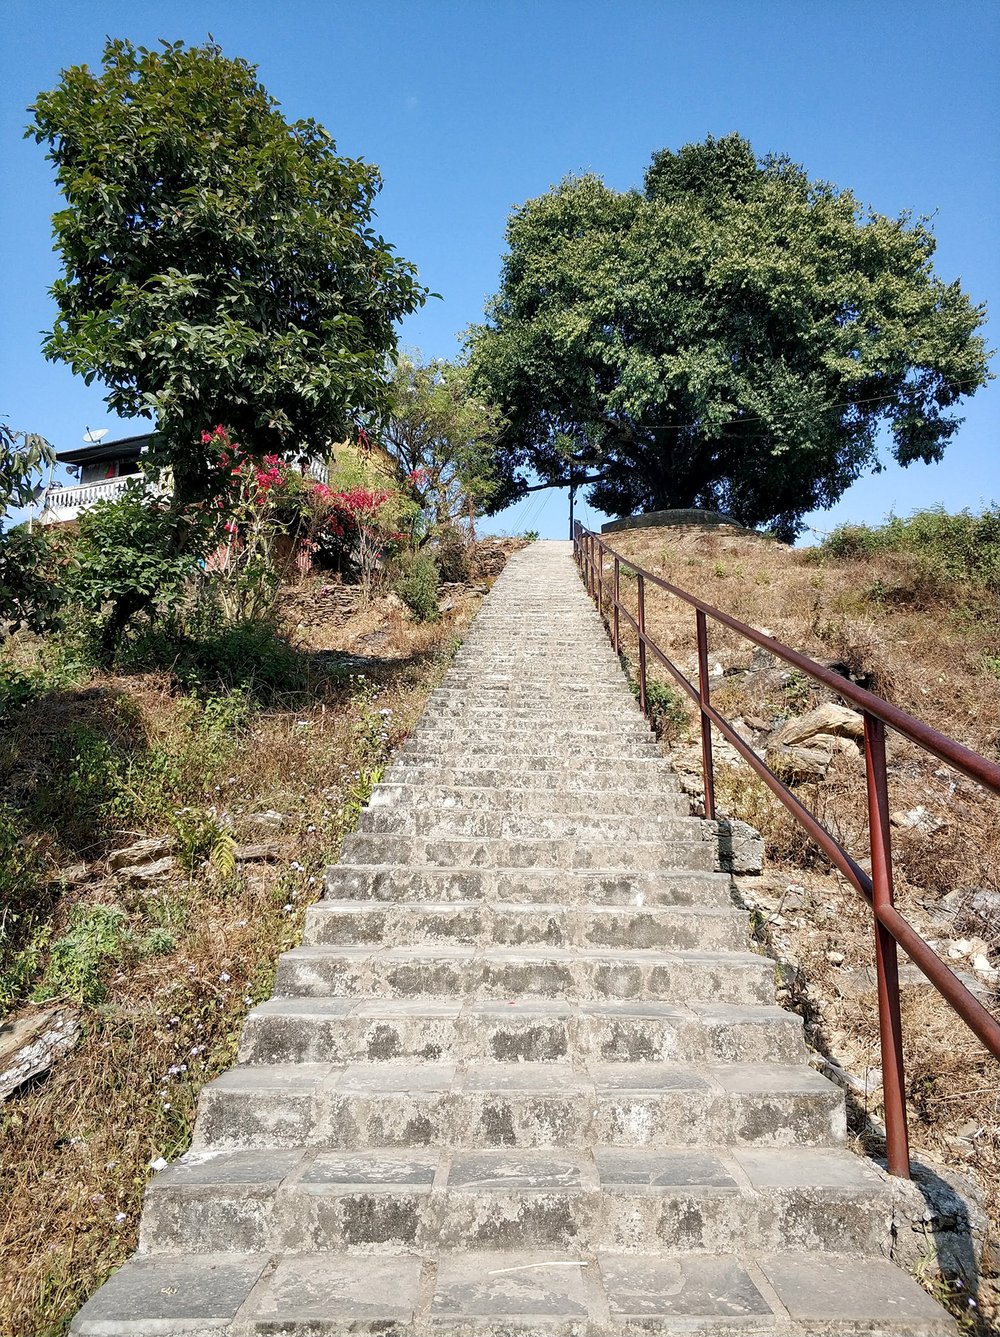  It wasn't only the amount of stairs that had us whining to ourself practically nonstop on the ascent, but the fact that most of them seemed to be going skyward at a 45° angle 